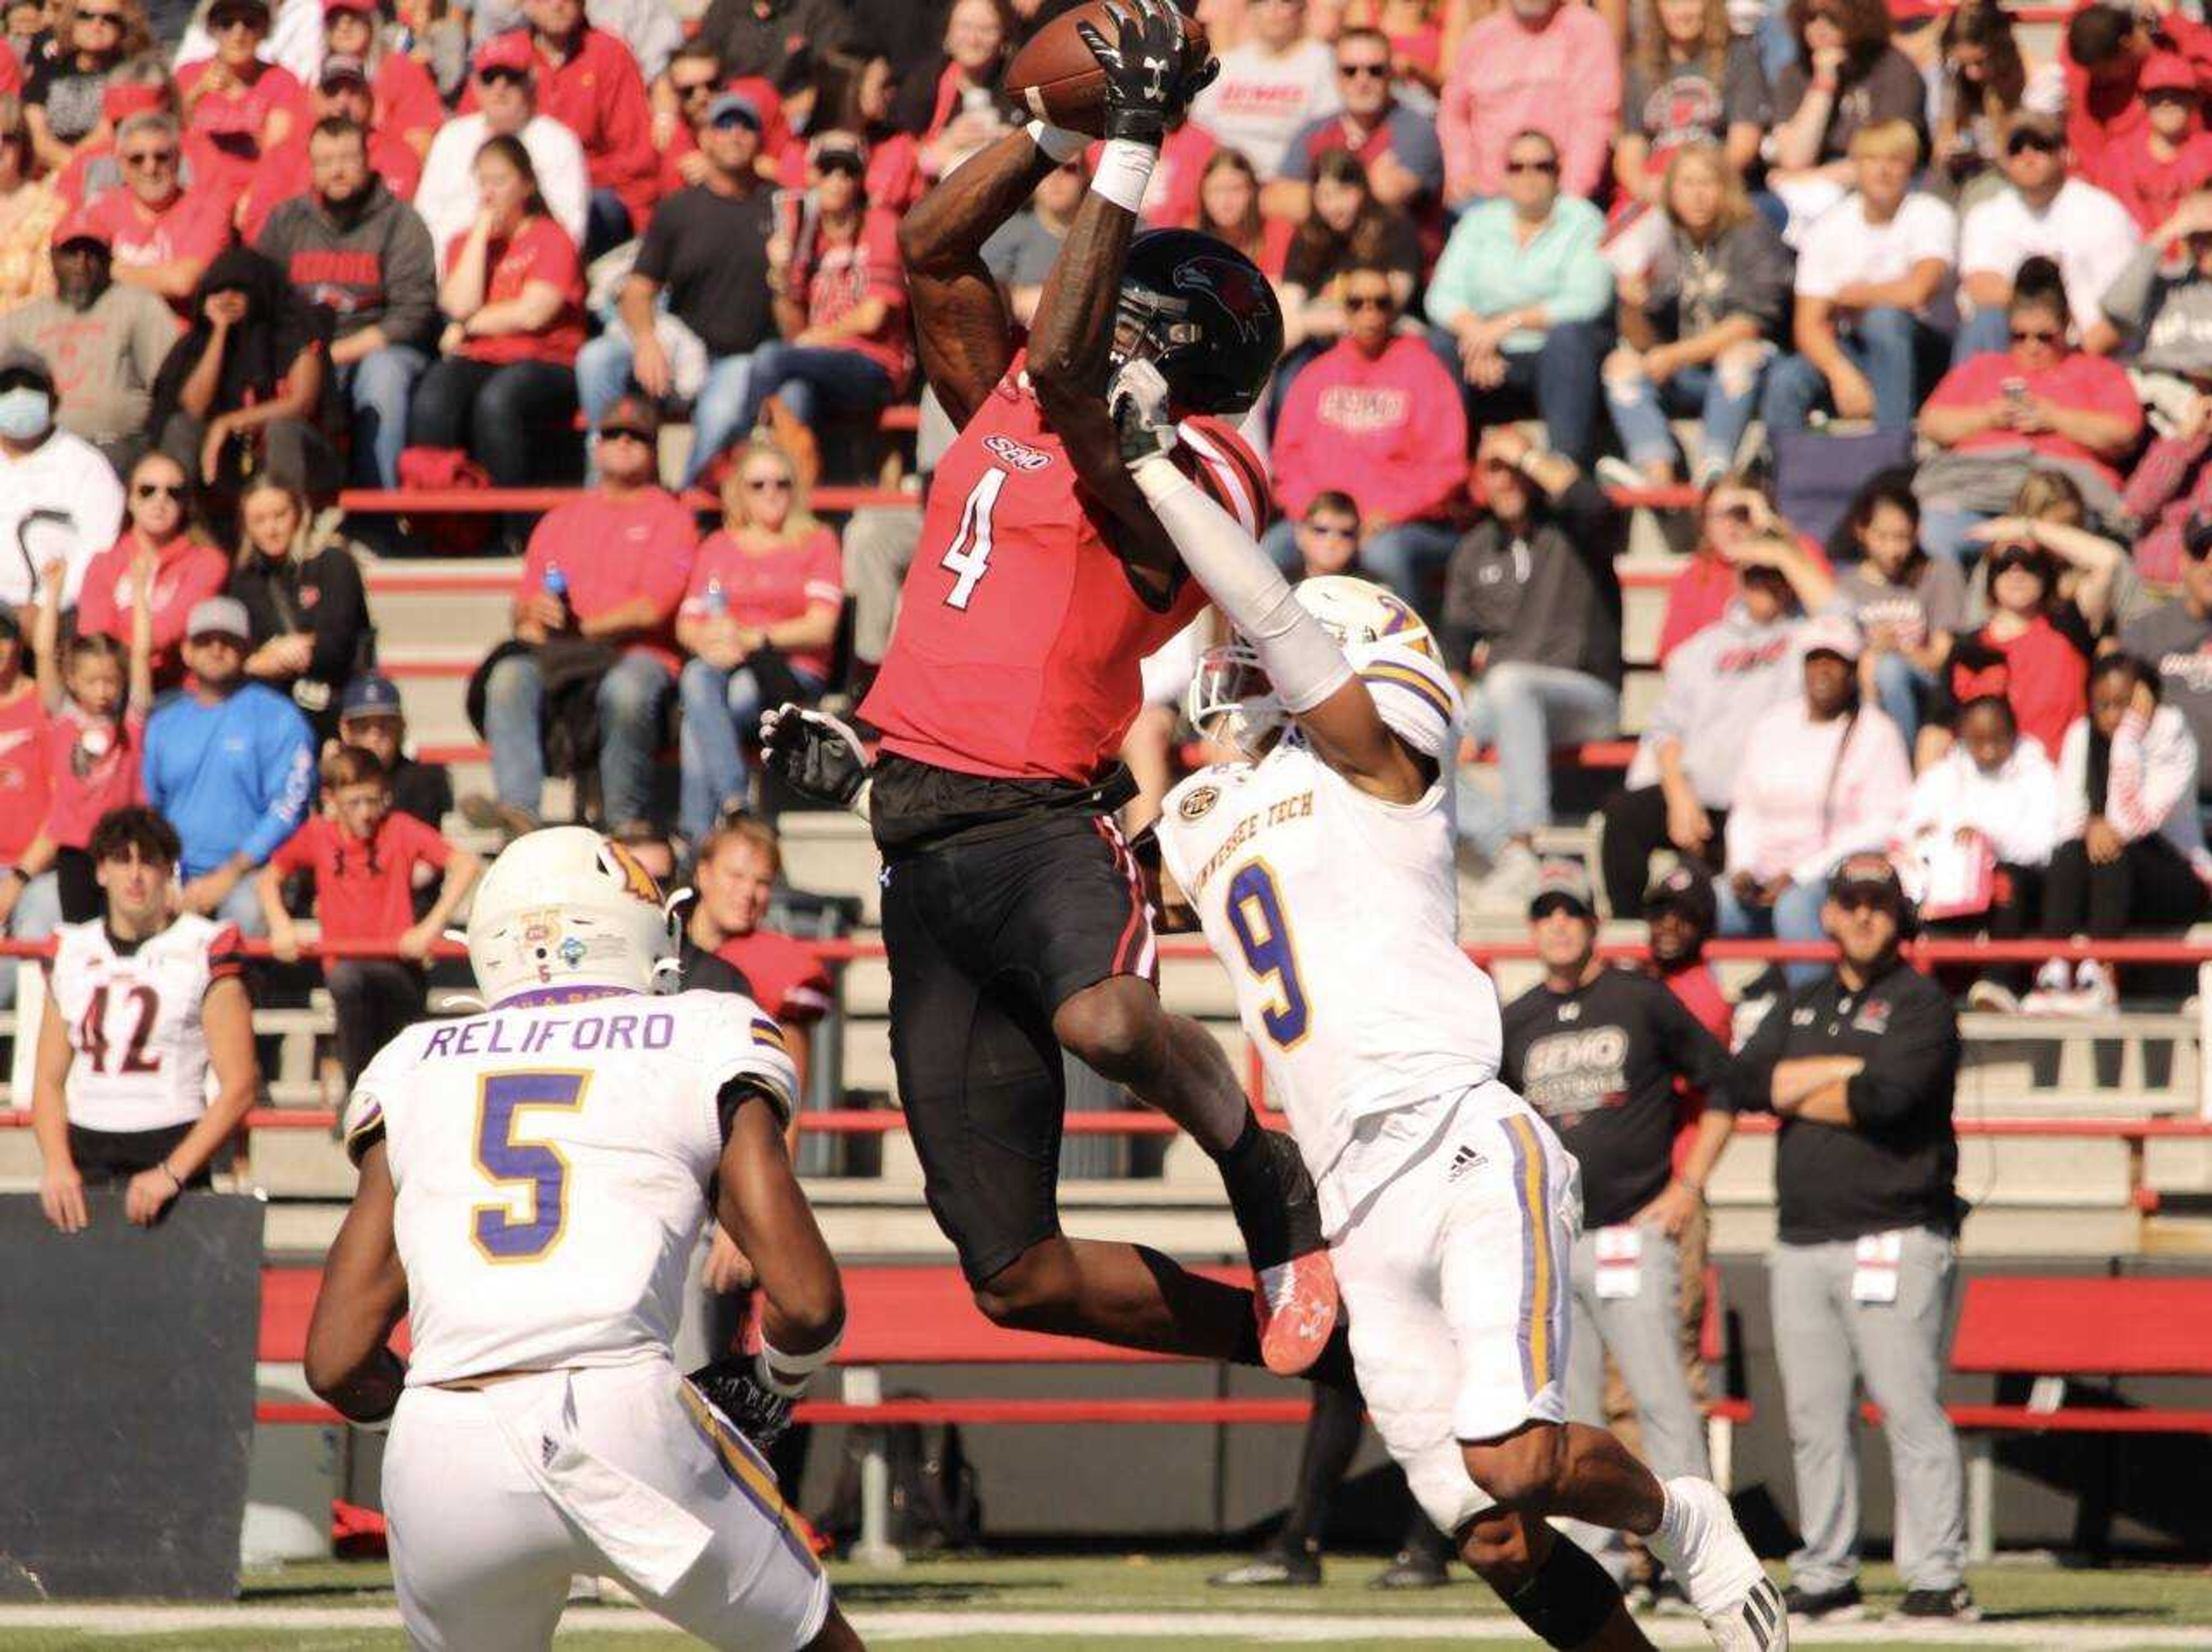 SEMO senior wide receiver Johnny King (4) reaches for a catch over Tennessee Tech sophomore defensive back Trace Danley (9).